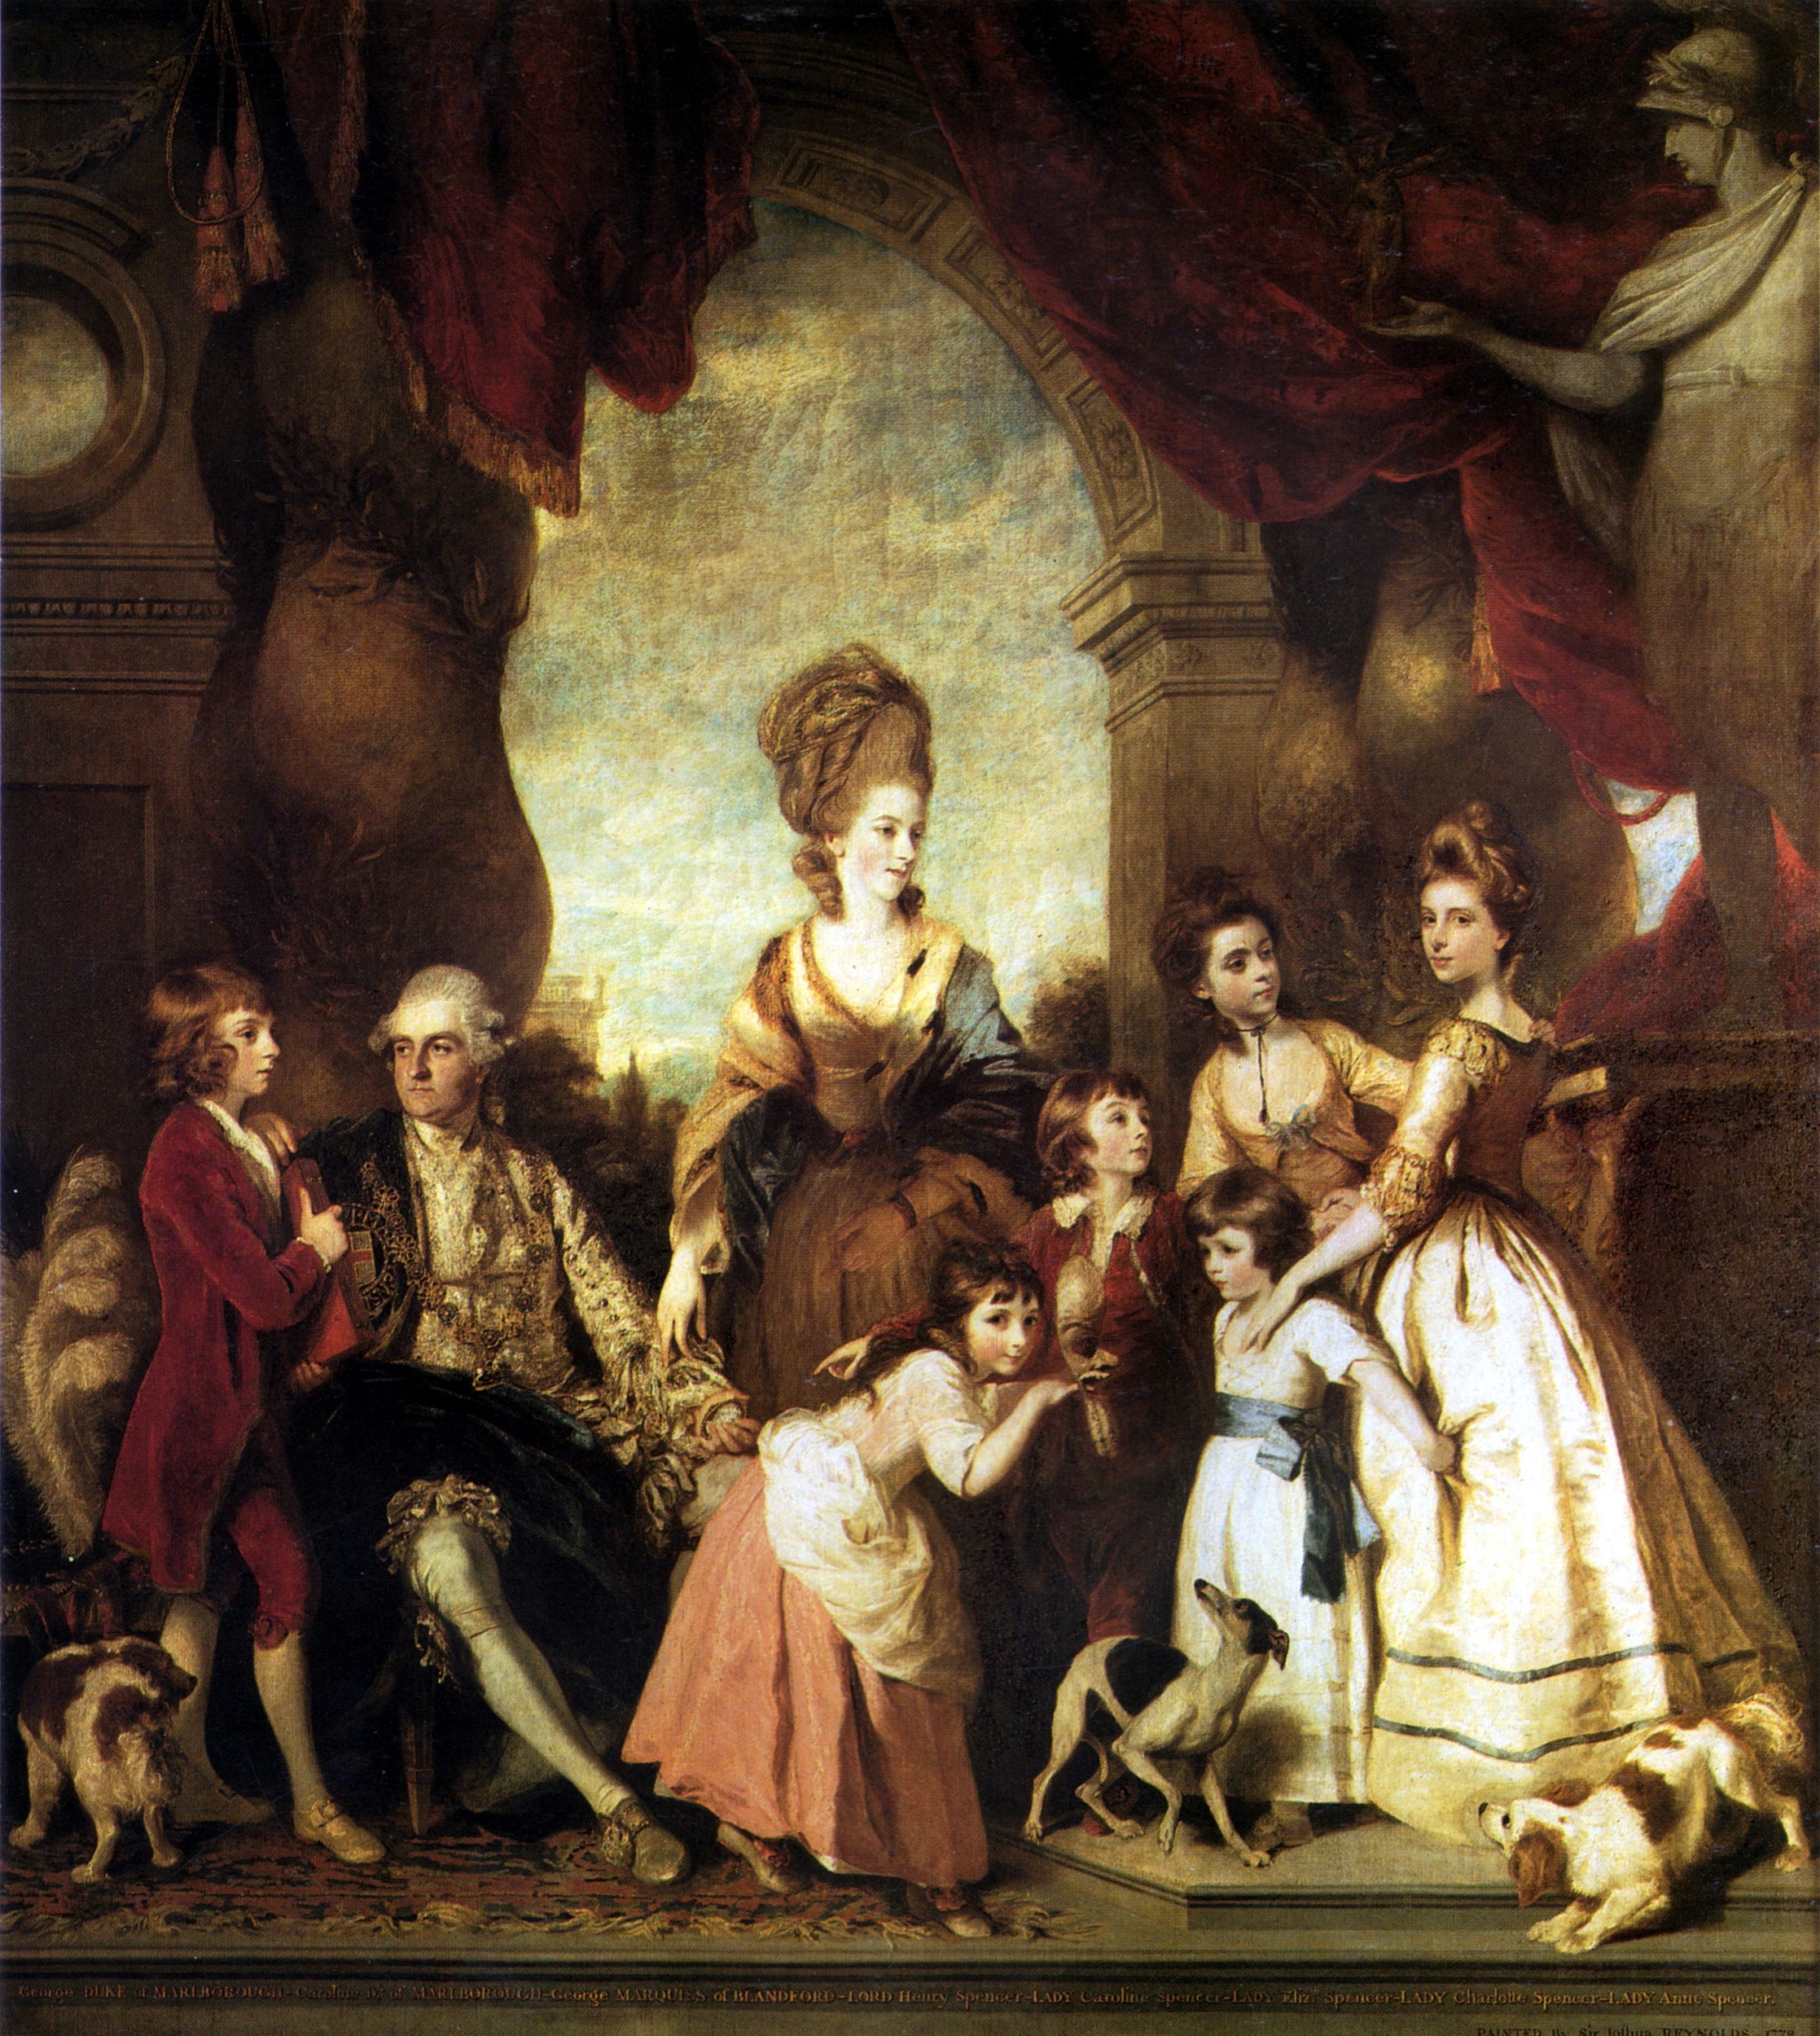 Oil painting of a family in a classical interior, featuring a standing woman at center with a bouffant hairdo, accompanied by a man in a white wig and six children of varying ages.